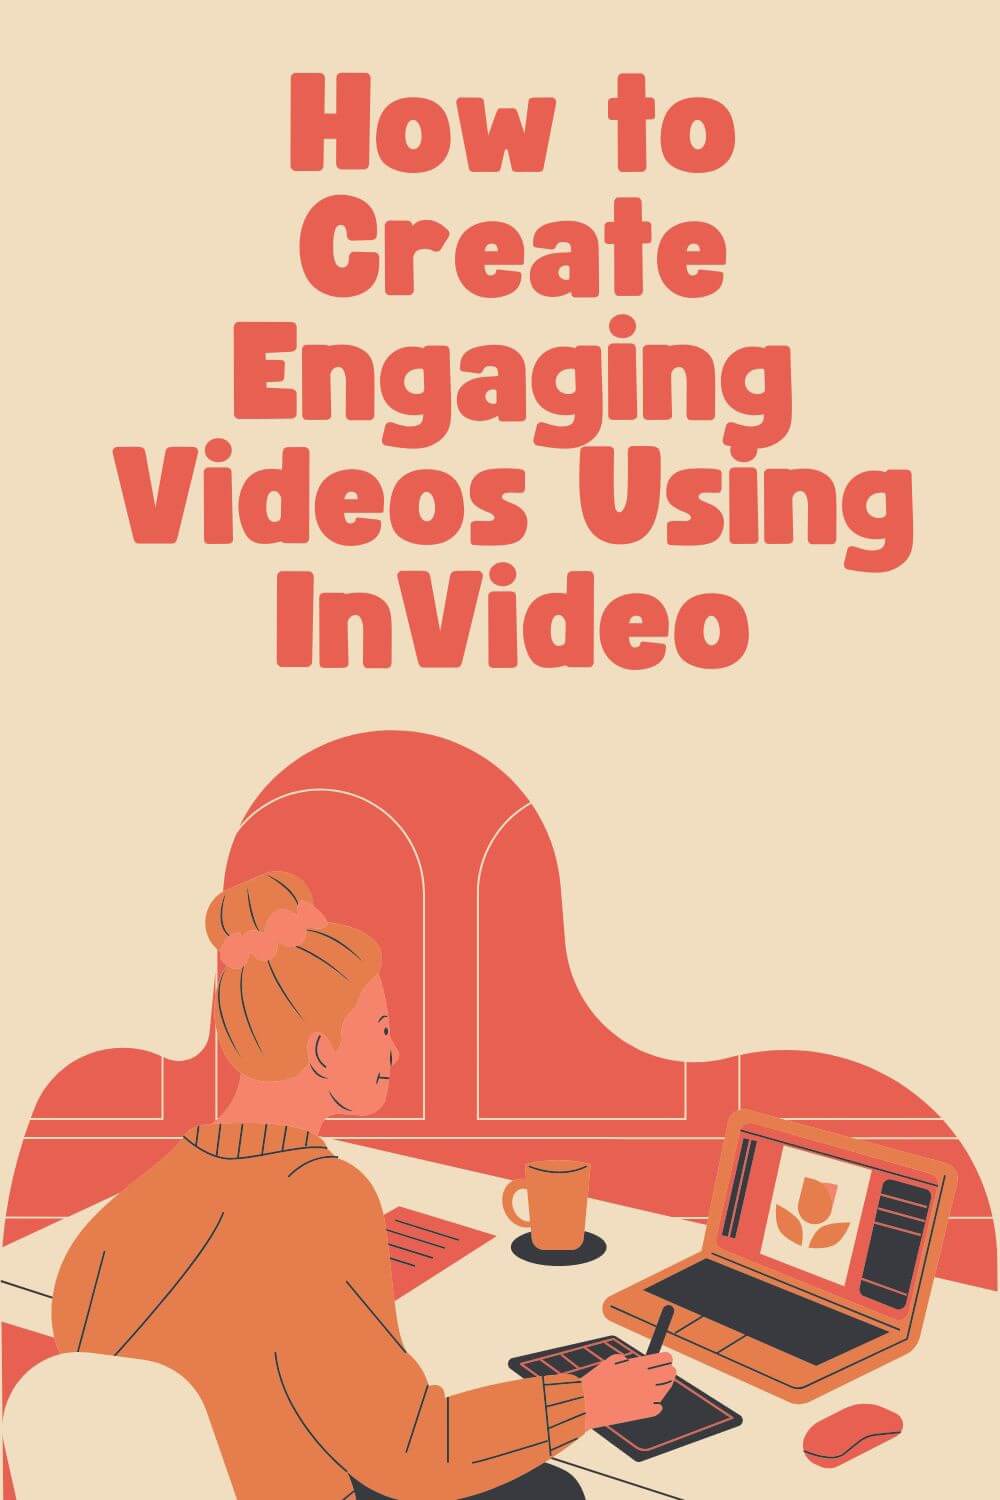 How to Create Engaging Videos Using InVideo